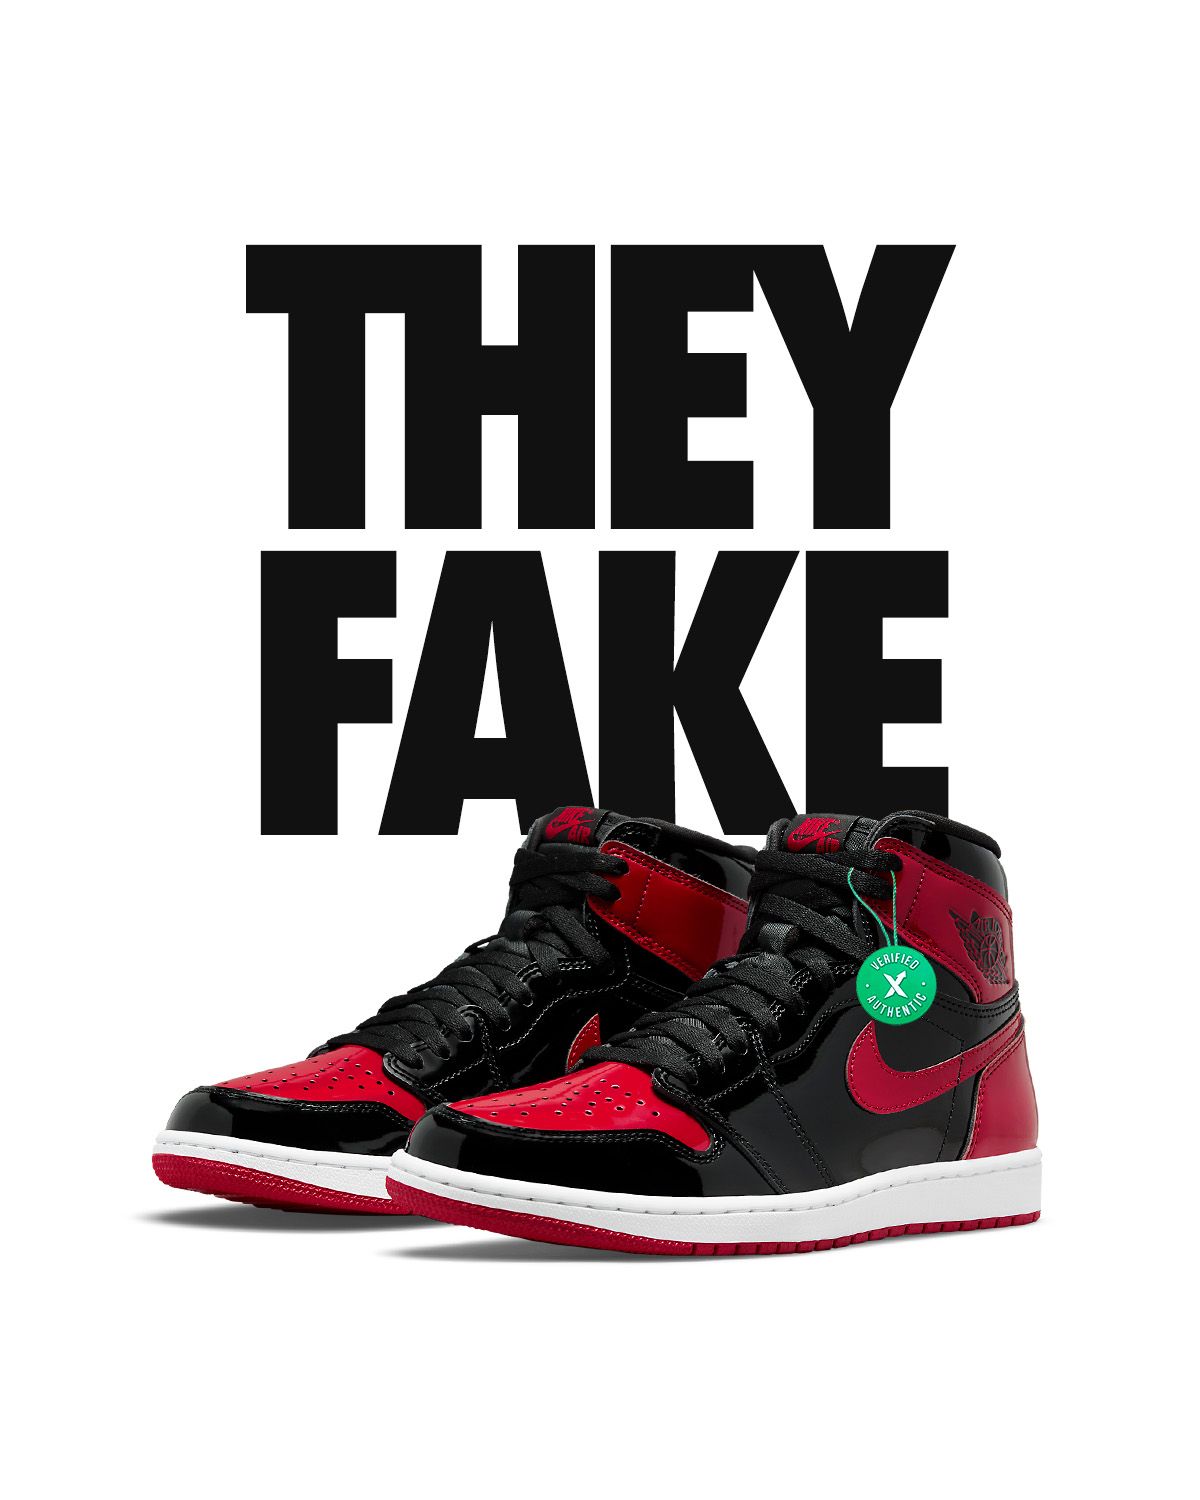 Alphabetical order use embrace Nike Sues StockX Over Selling Fake Sneakers | HOUSE OF HEAT